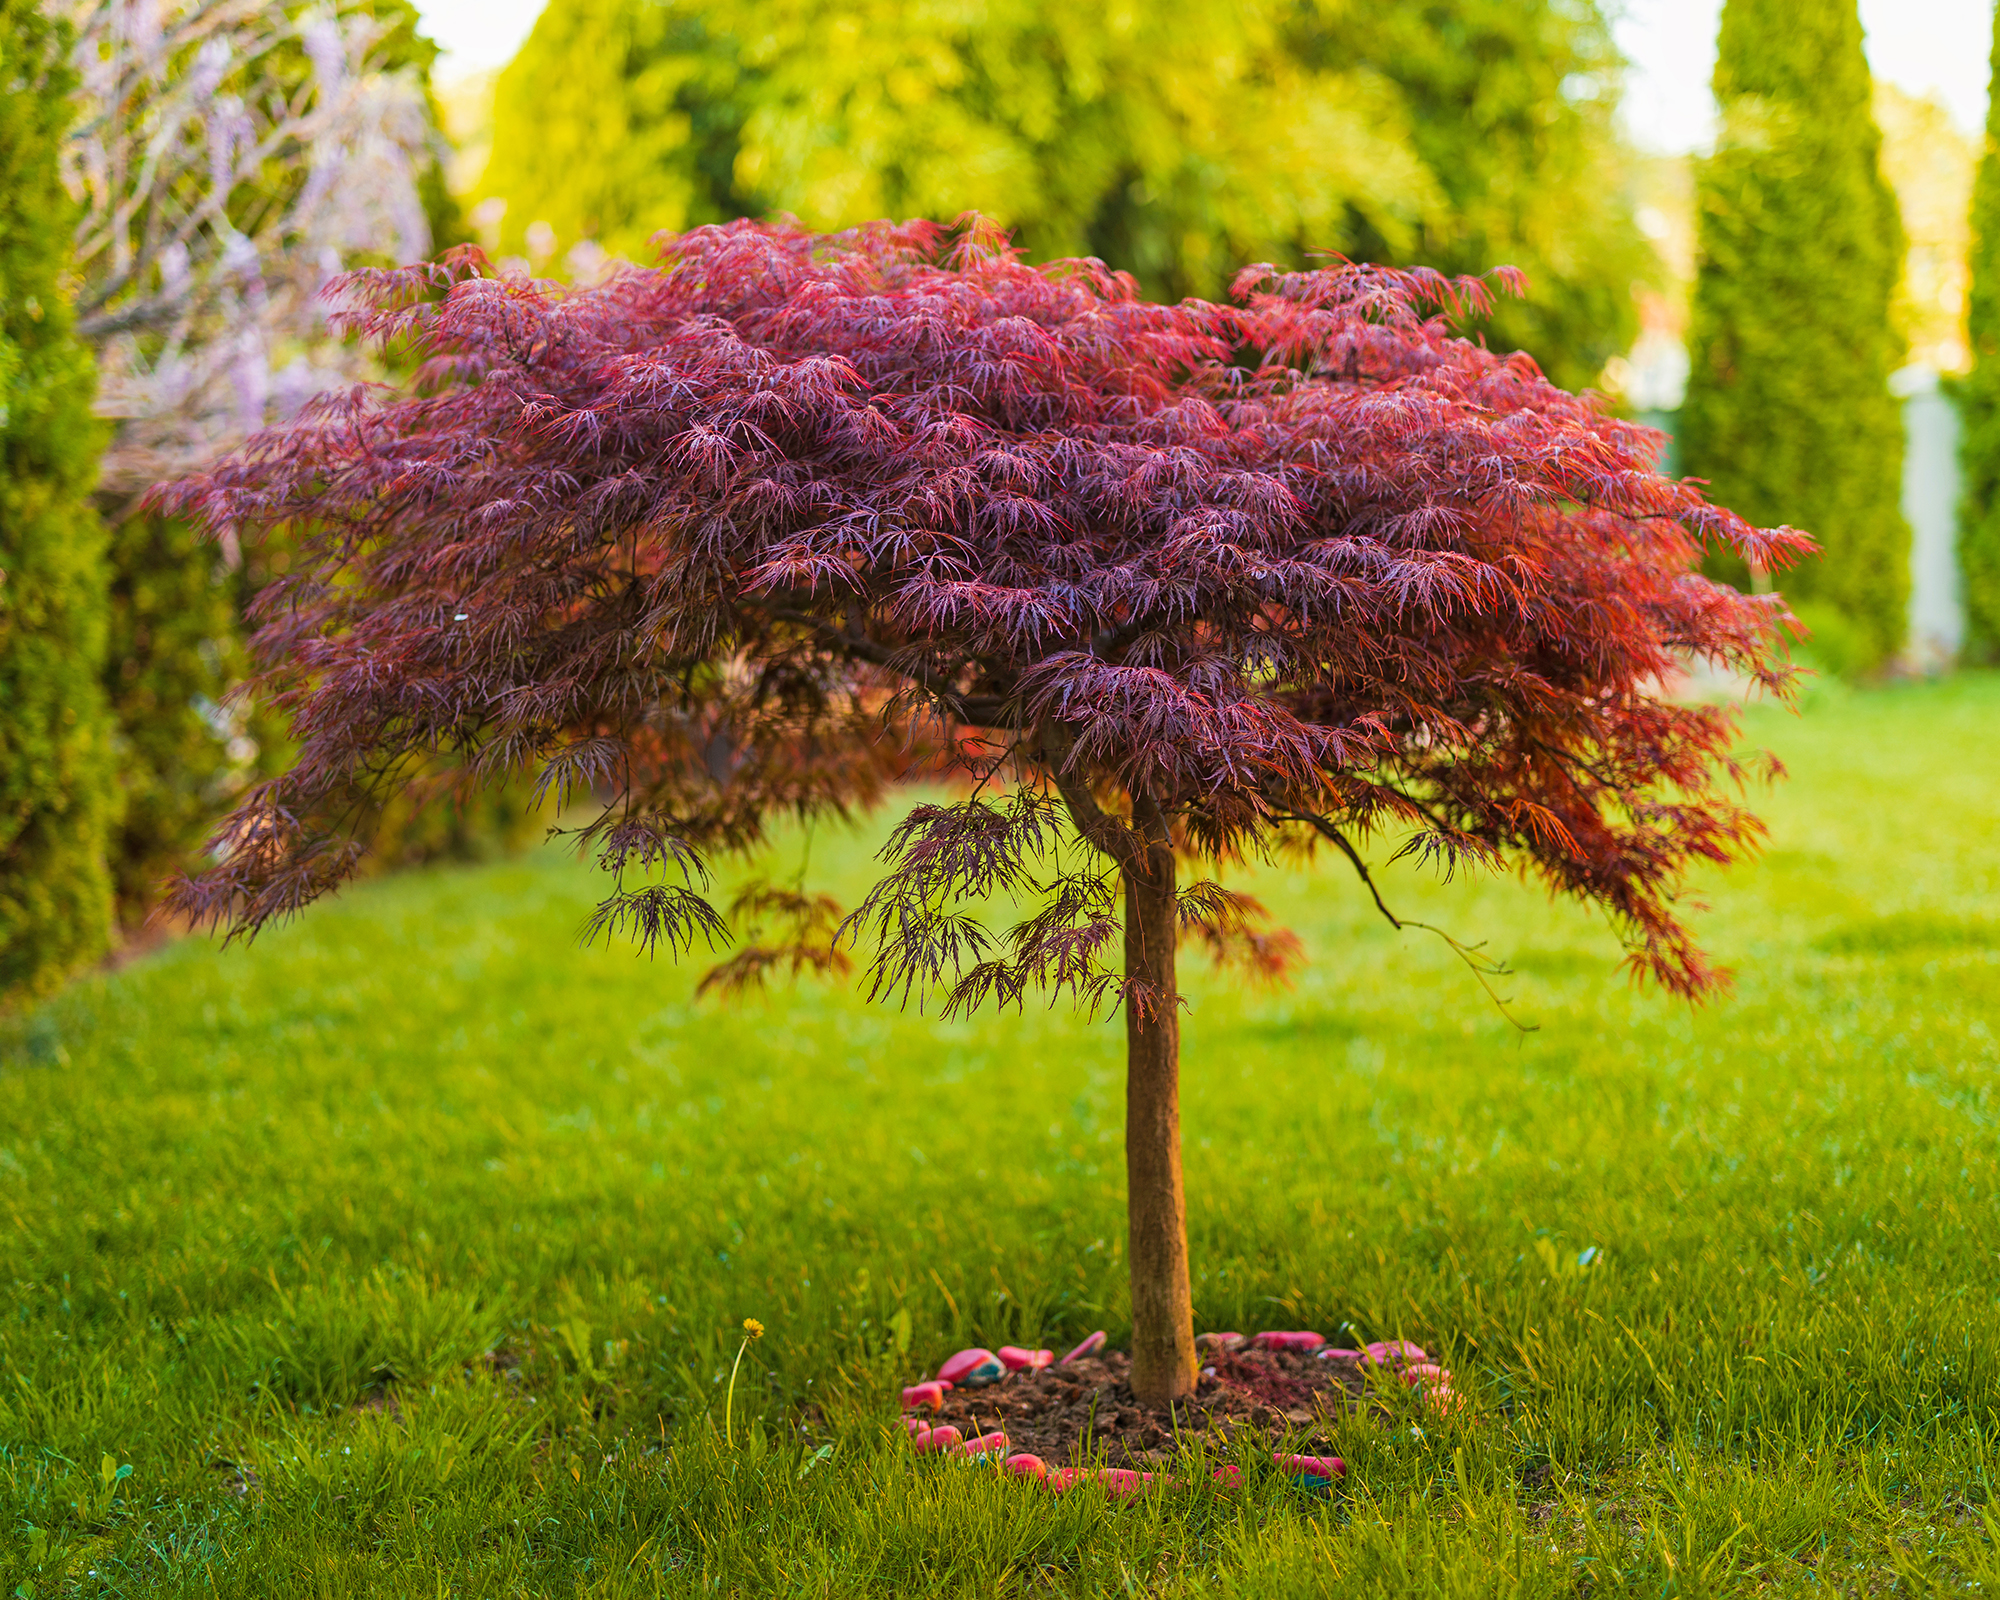 Red Japanese maple tree